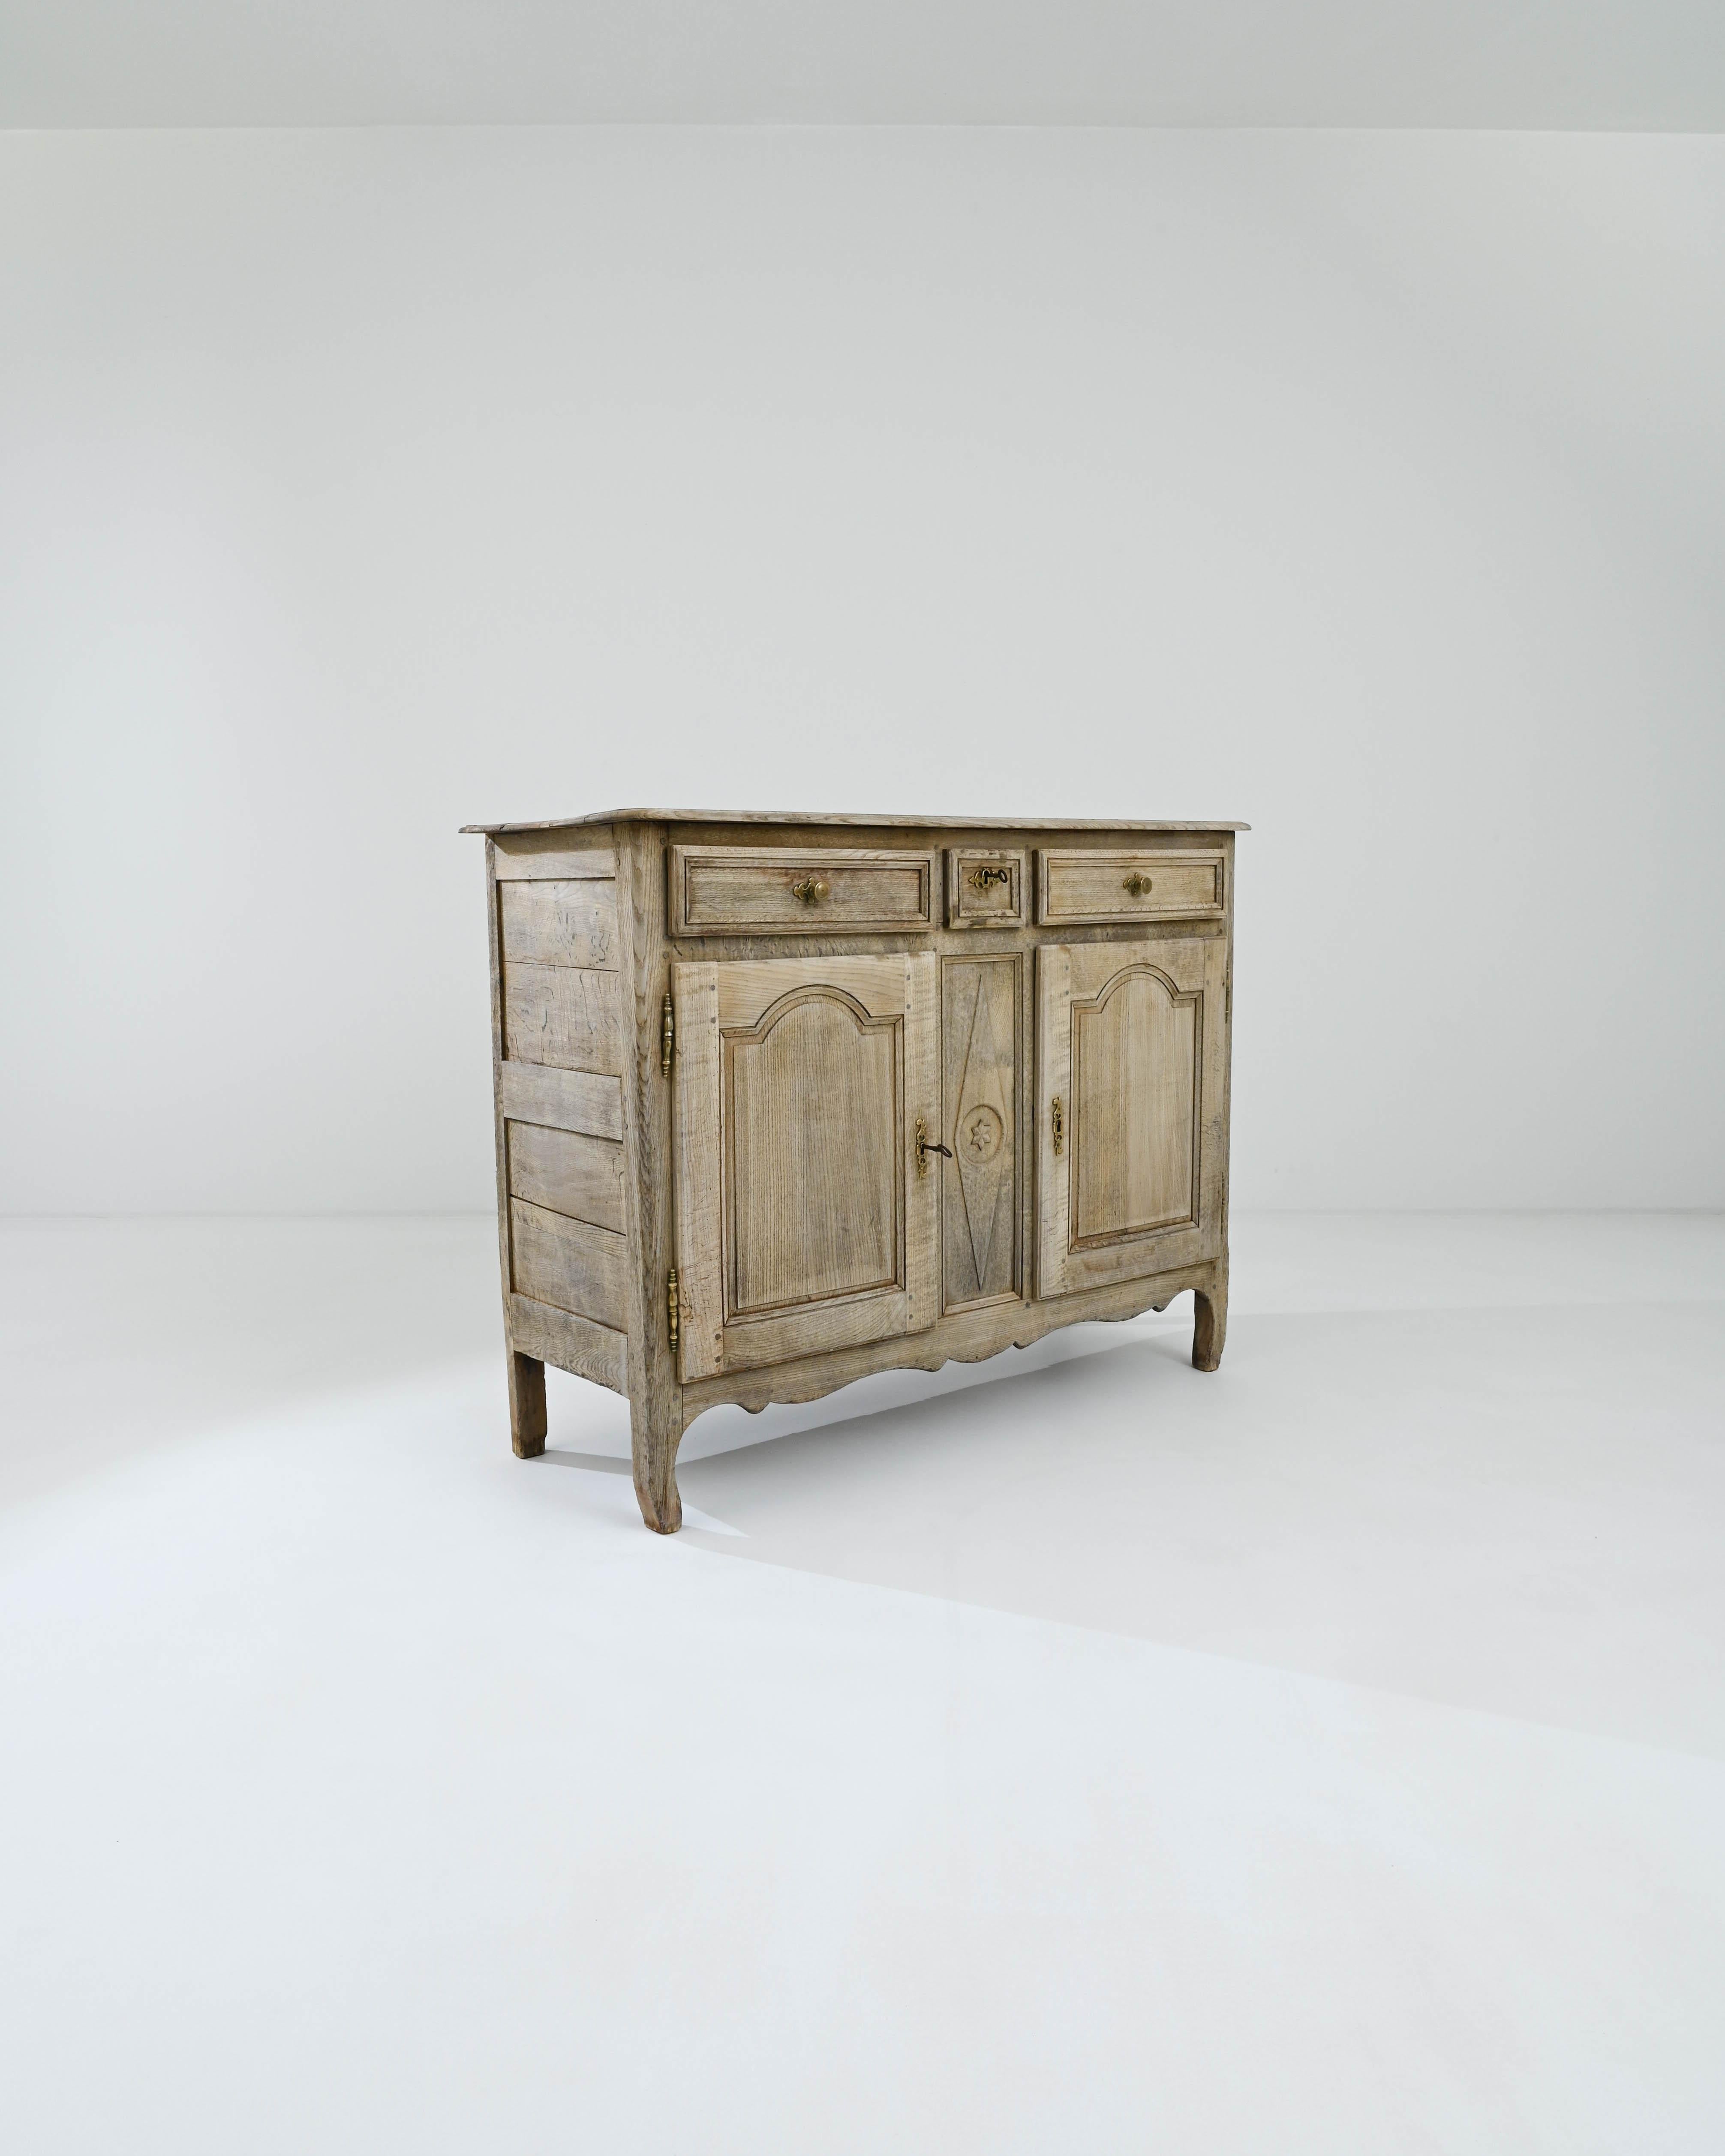 The quintessential Country French buffet cabinet, made in the 19th Century. The simple geometric shape recalls a countryside local and the time tested approach of regional French cabinet makers. Combining earthy colors and elevated craftsmanship,